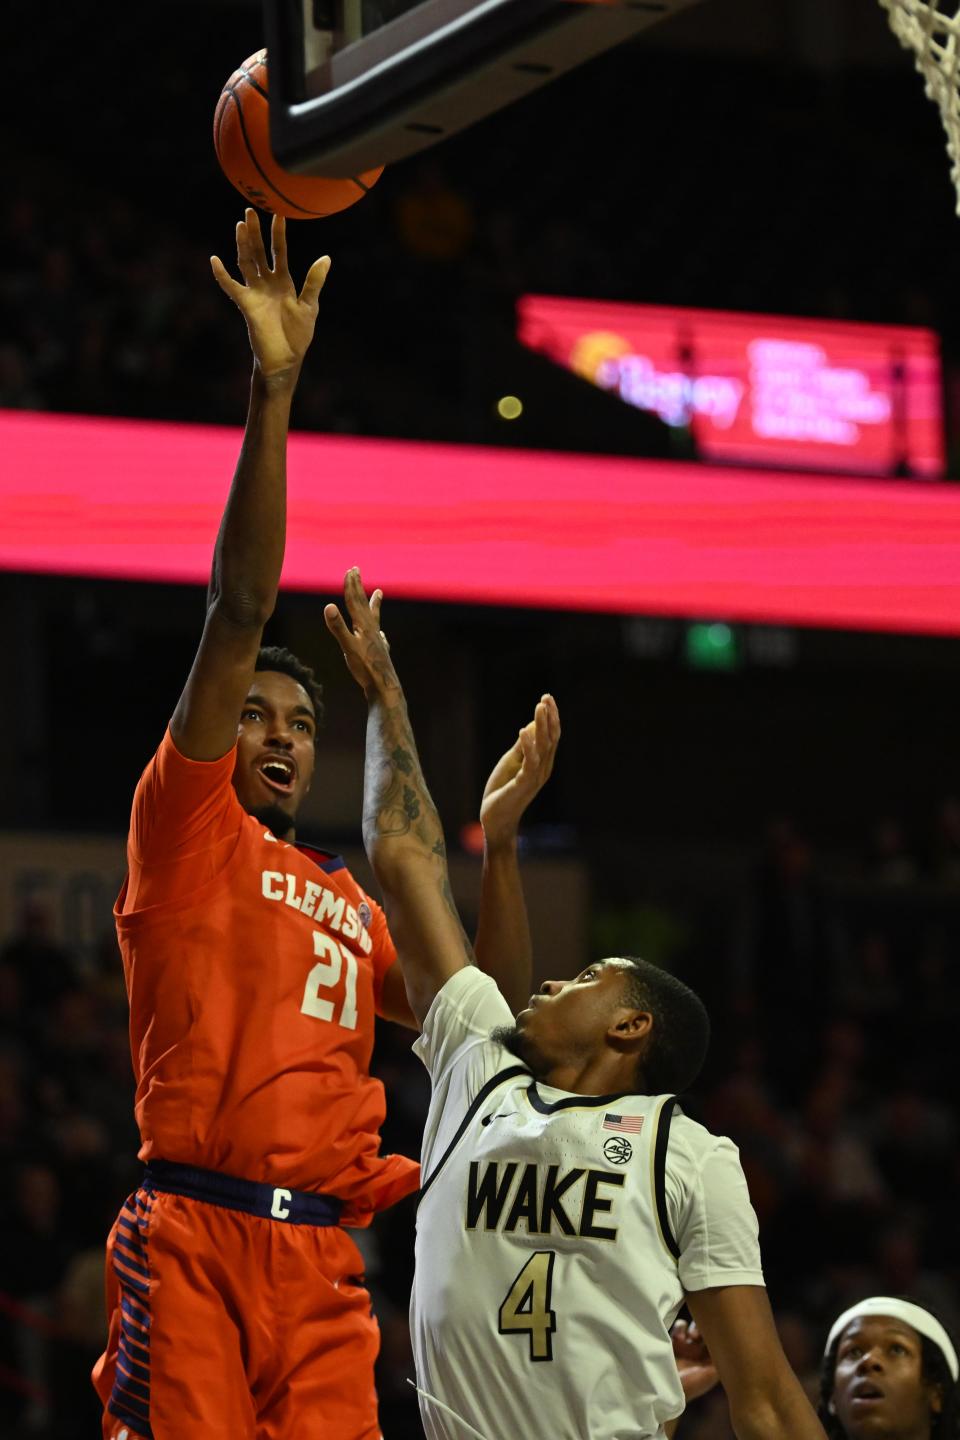 Jan 17, 2023; Winston-Salem, North Carolina, USA; Clemson Tigers forward Chauncey Wiggins (21) shoots the ball over Wake Forest Demon Deacons guard Daivien Williamson (4) during the second half at Lawrence Joel Veterans Memorial Coliseum. Mandatory Credit: William Howard-USA TODAY Sports